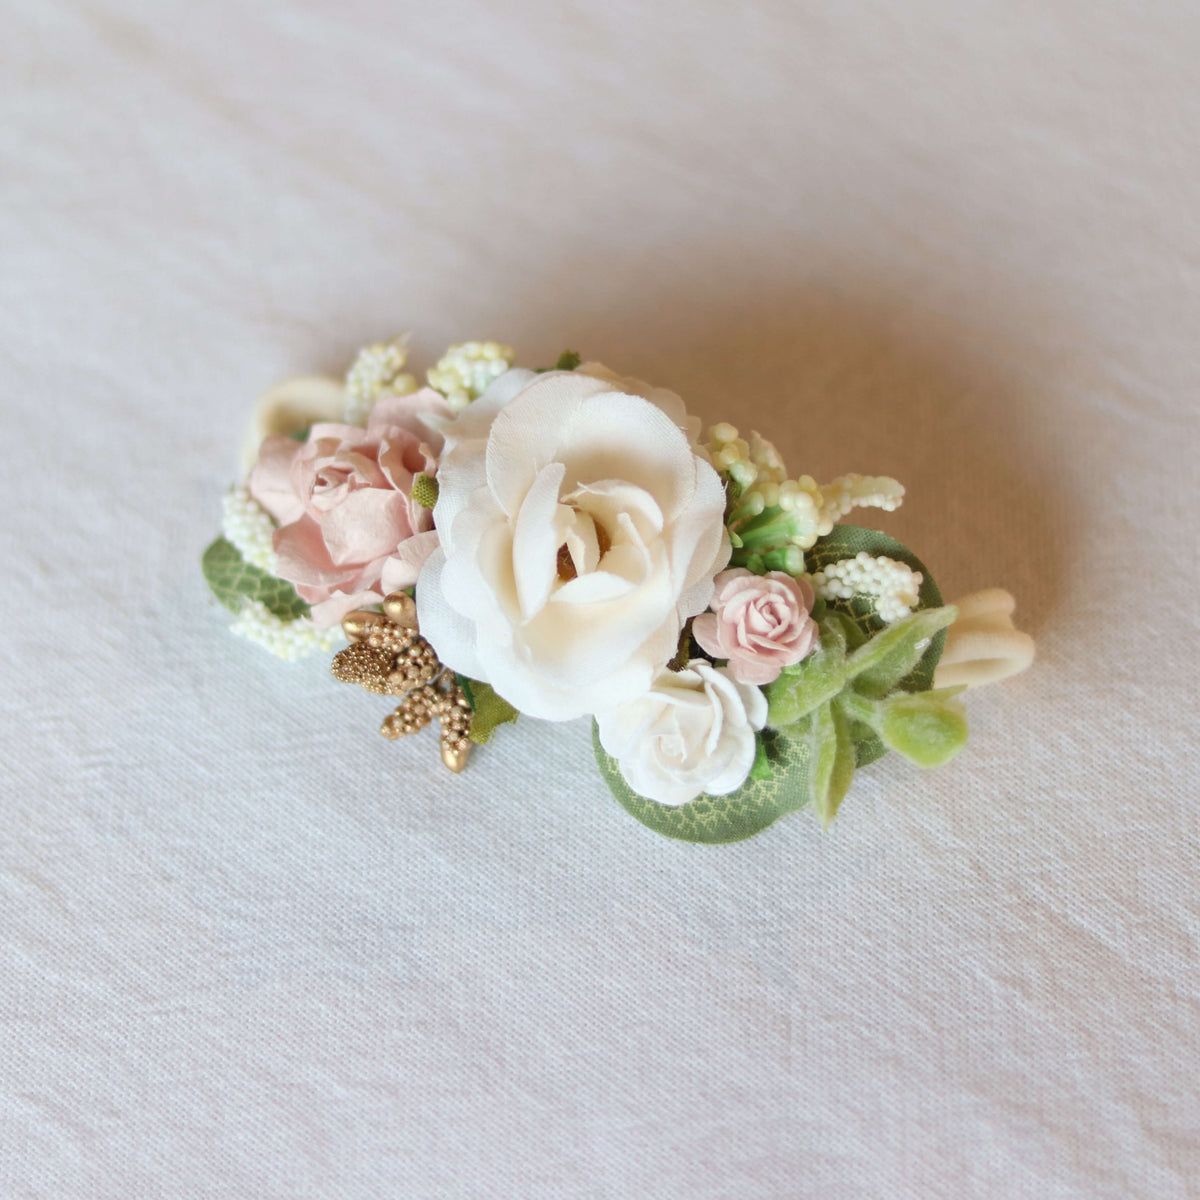 Norah baby girl flower crown on a soft fabric headband, composed of a large ivory flower surrounded by smaller blush and ivory flowers, gold accents and greenery.